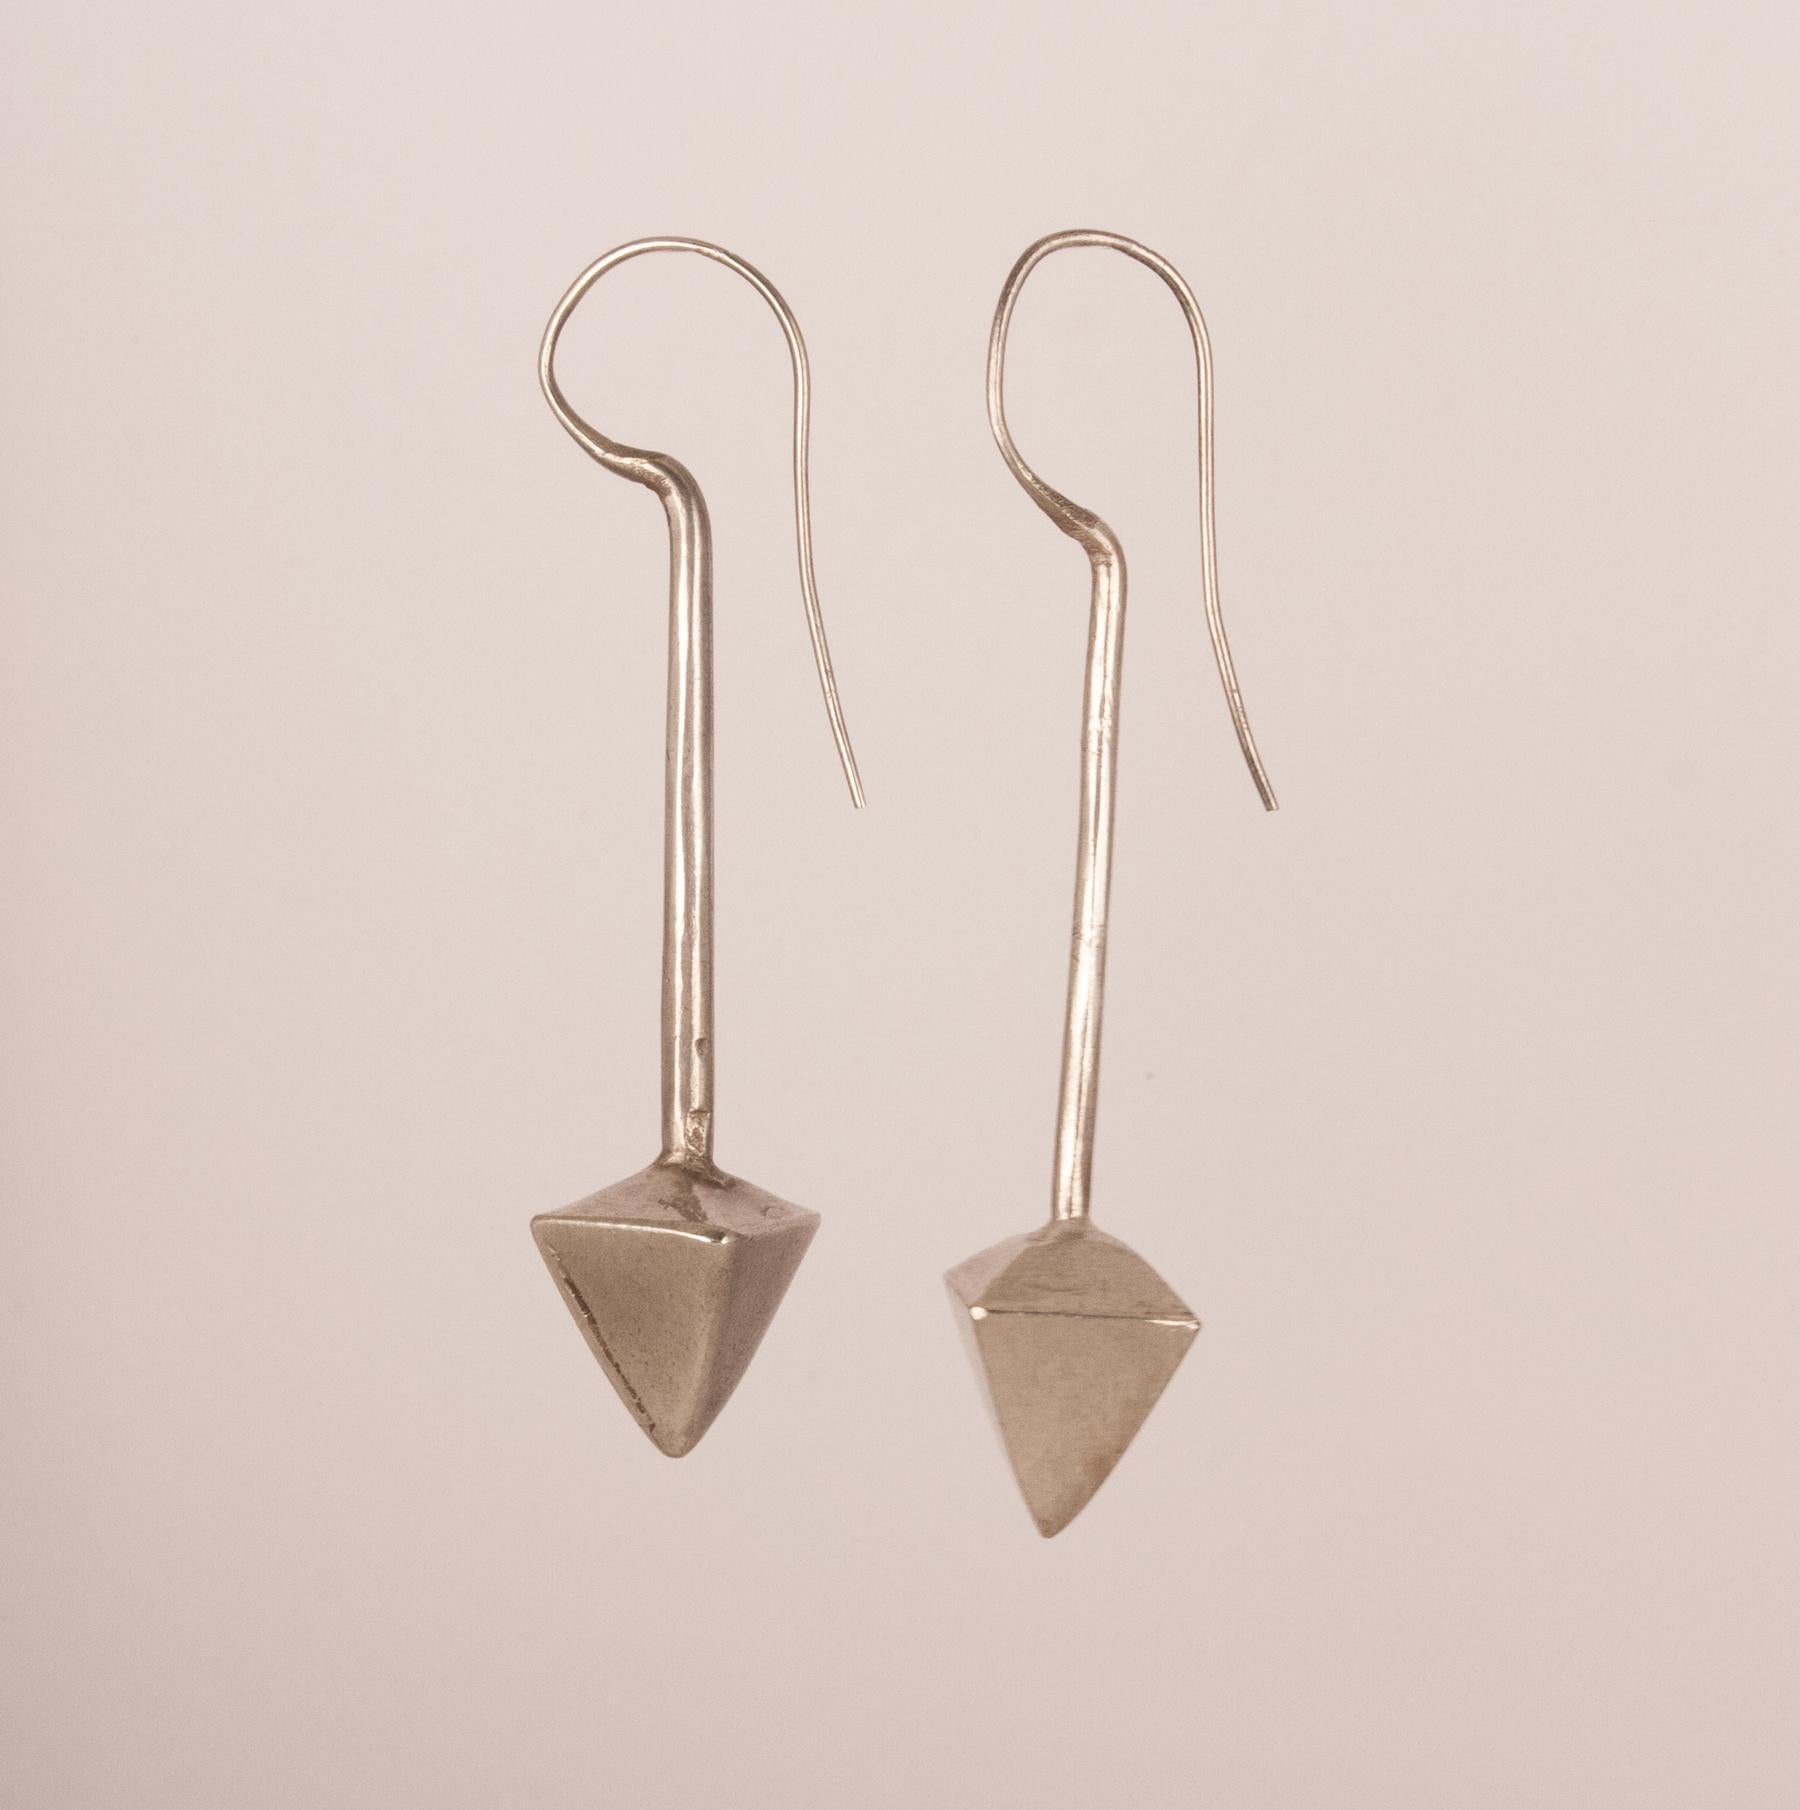 Tribal silver earrings with a pyramid design from north India, circa 1940. Despite their age and history, these silver earrings have a modern architectural appeal as well as a beautiful silver tone. The fixed wires are a bit thicker than today's